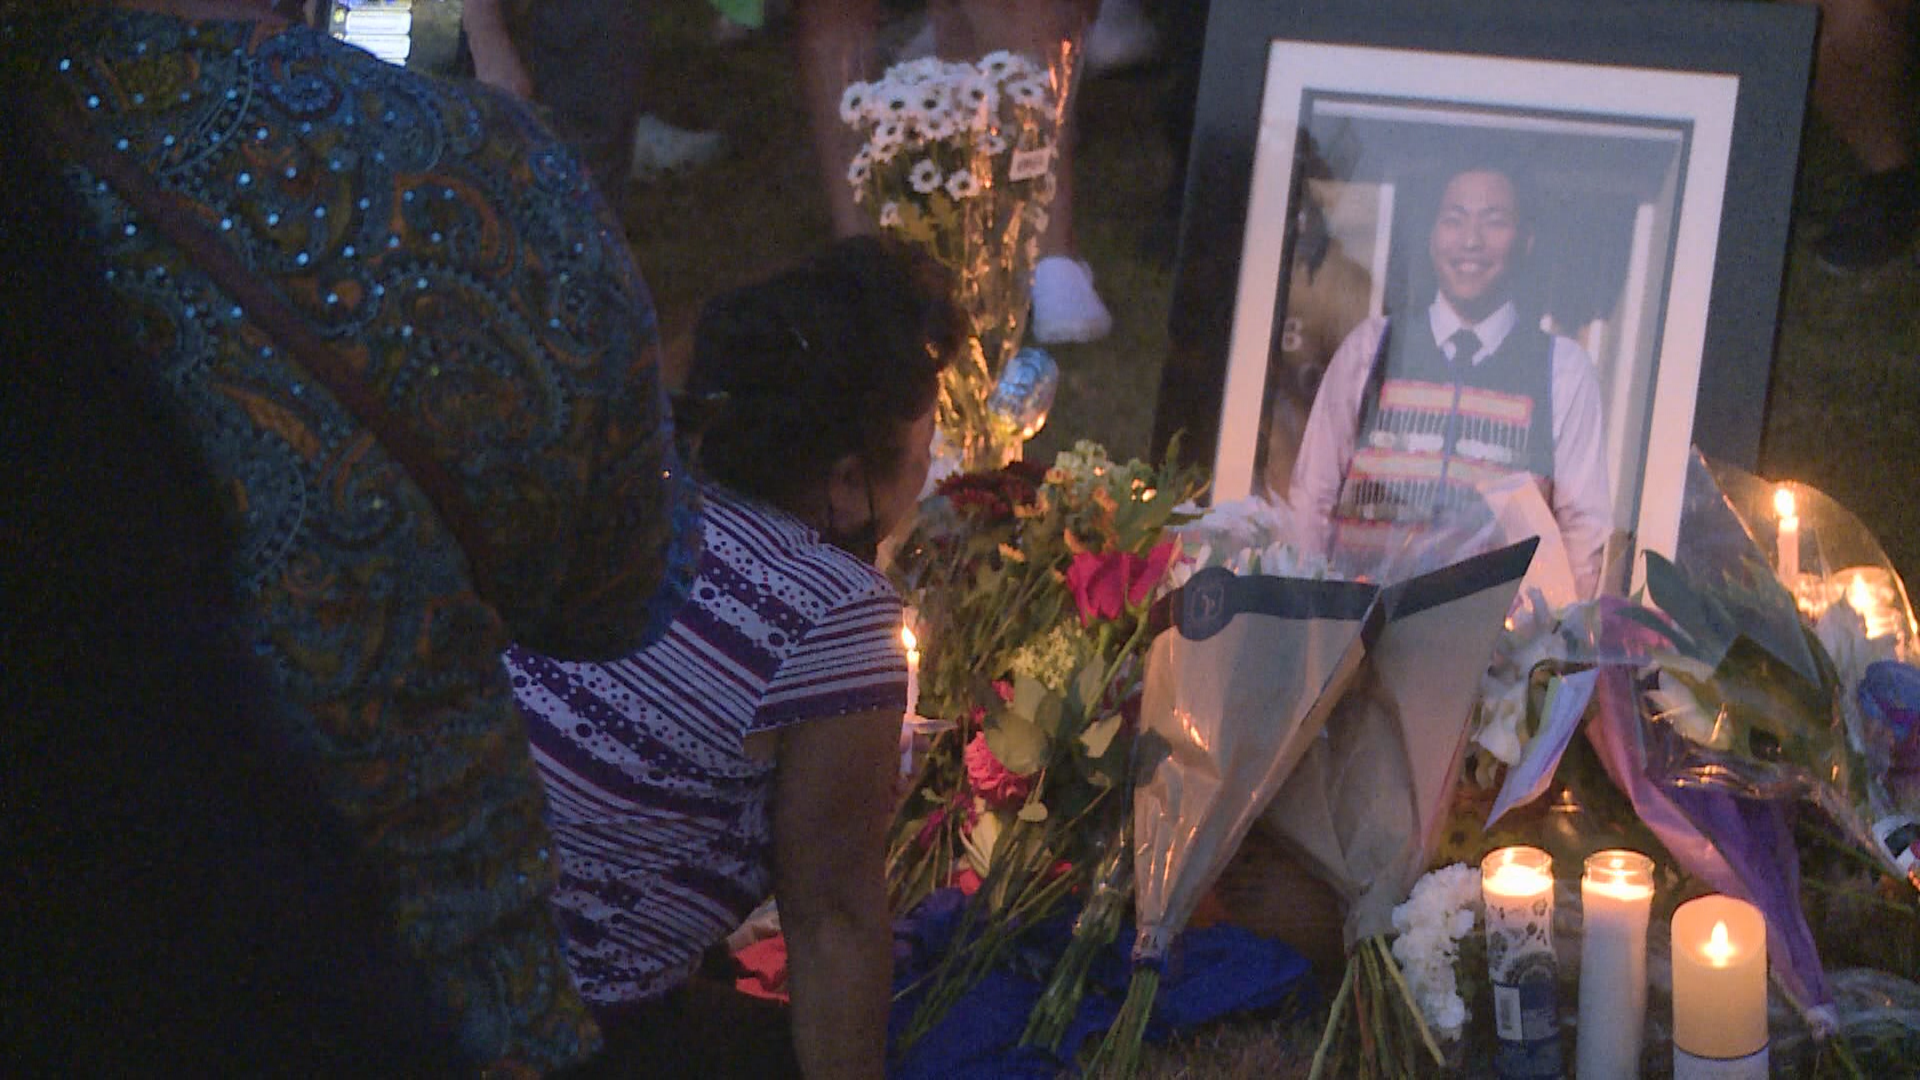 Family still searching for answers months after man killed in Maplewood hit-and-run